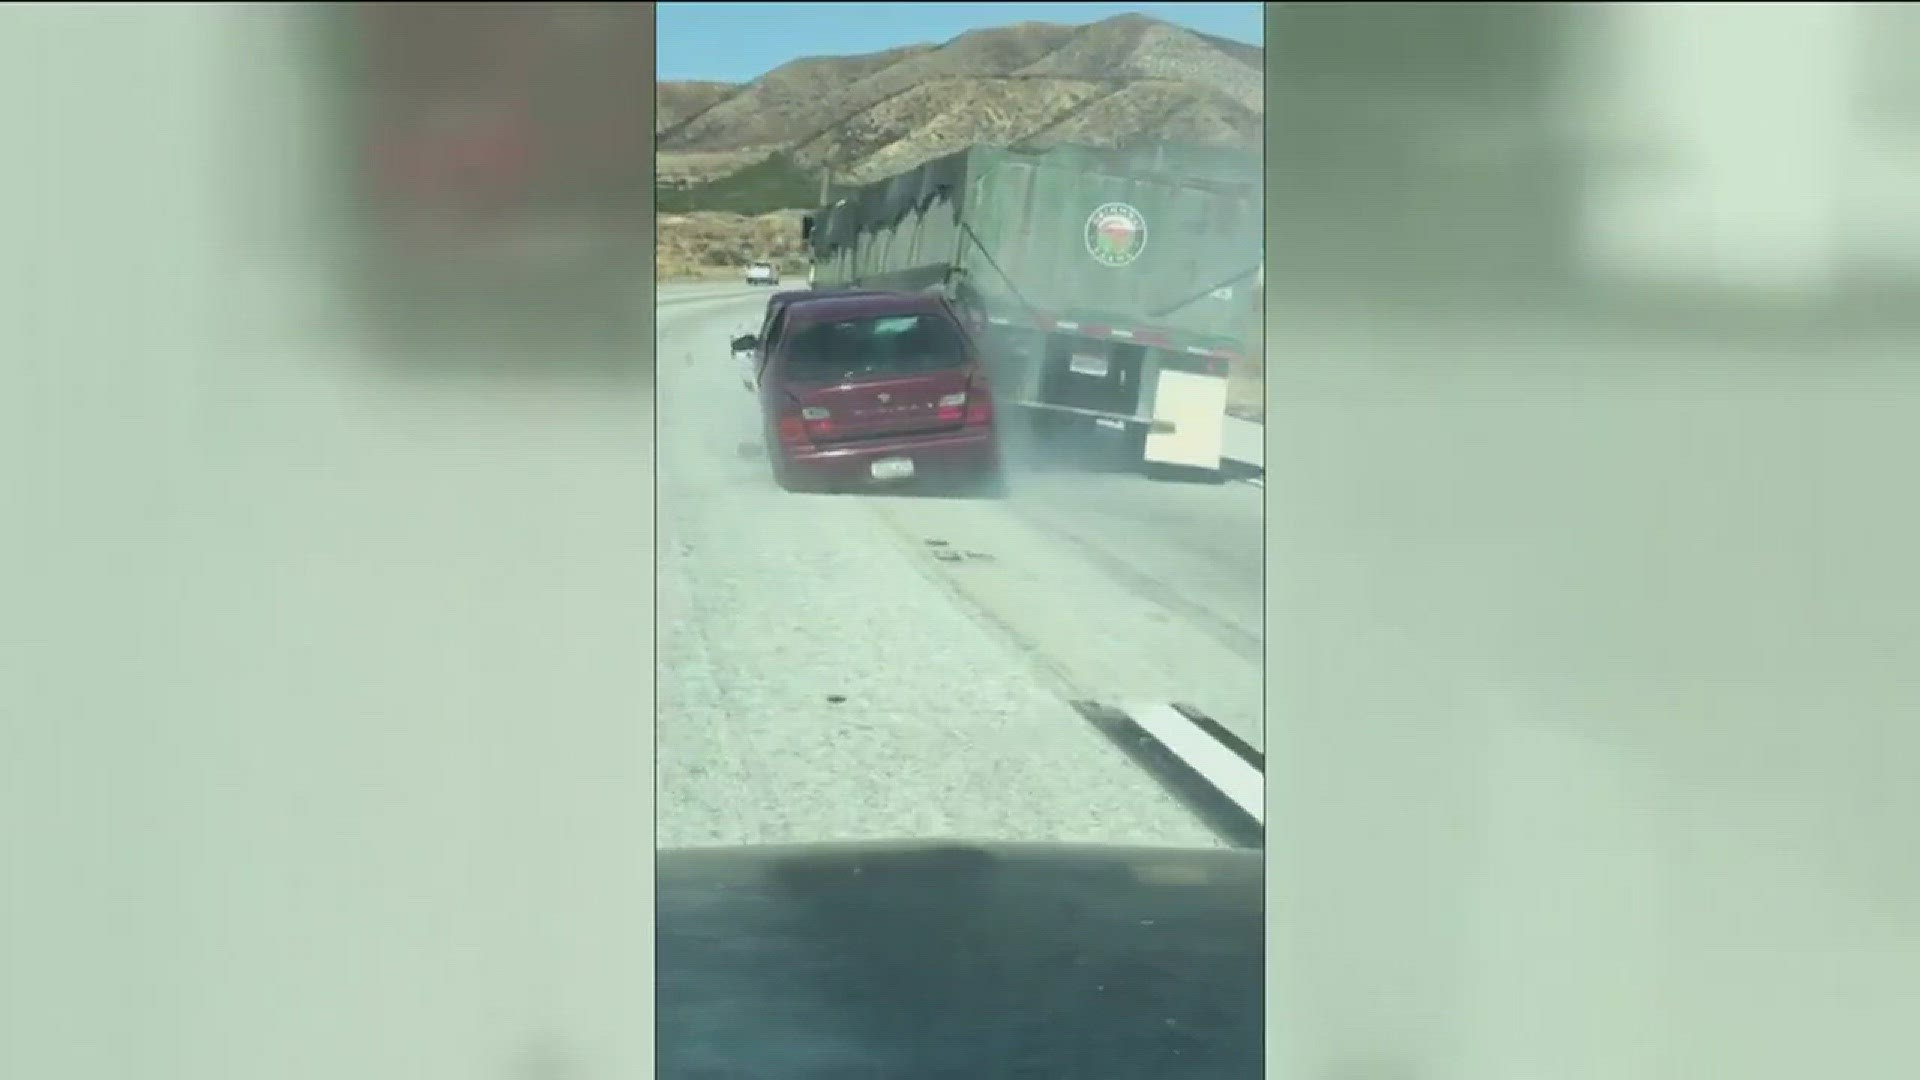 Video shows wrecked car being dragged by semitruck in Cajon Pass ...